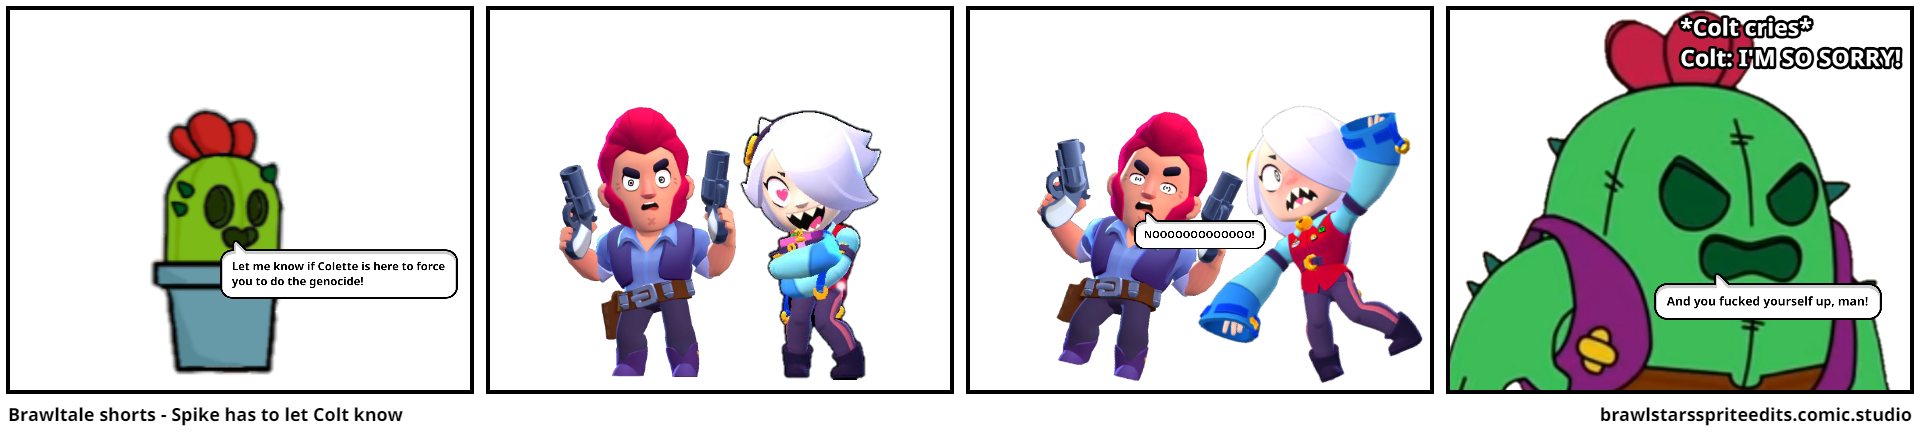 Brawltale shorts - Spike has to let Colt know